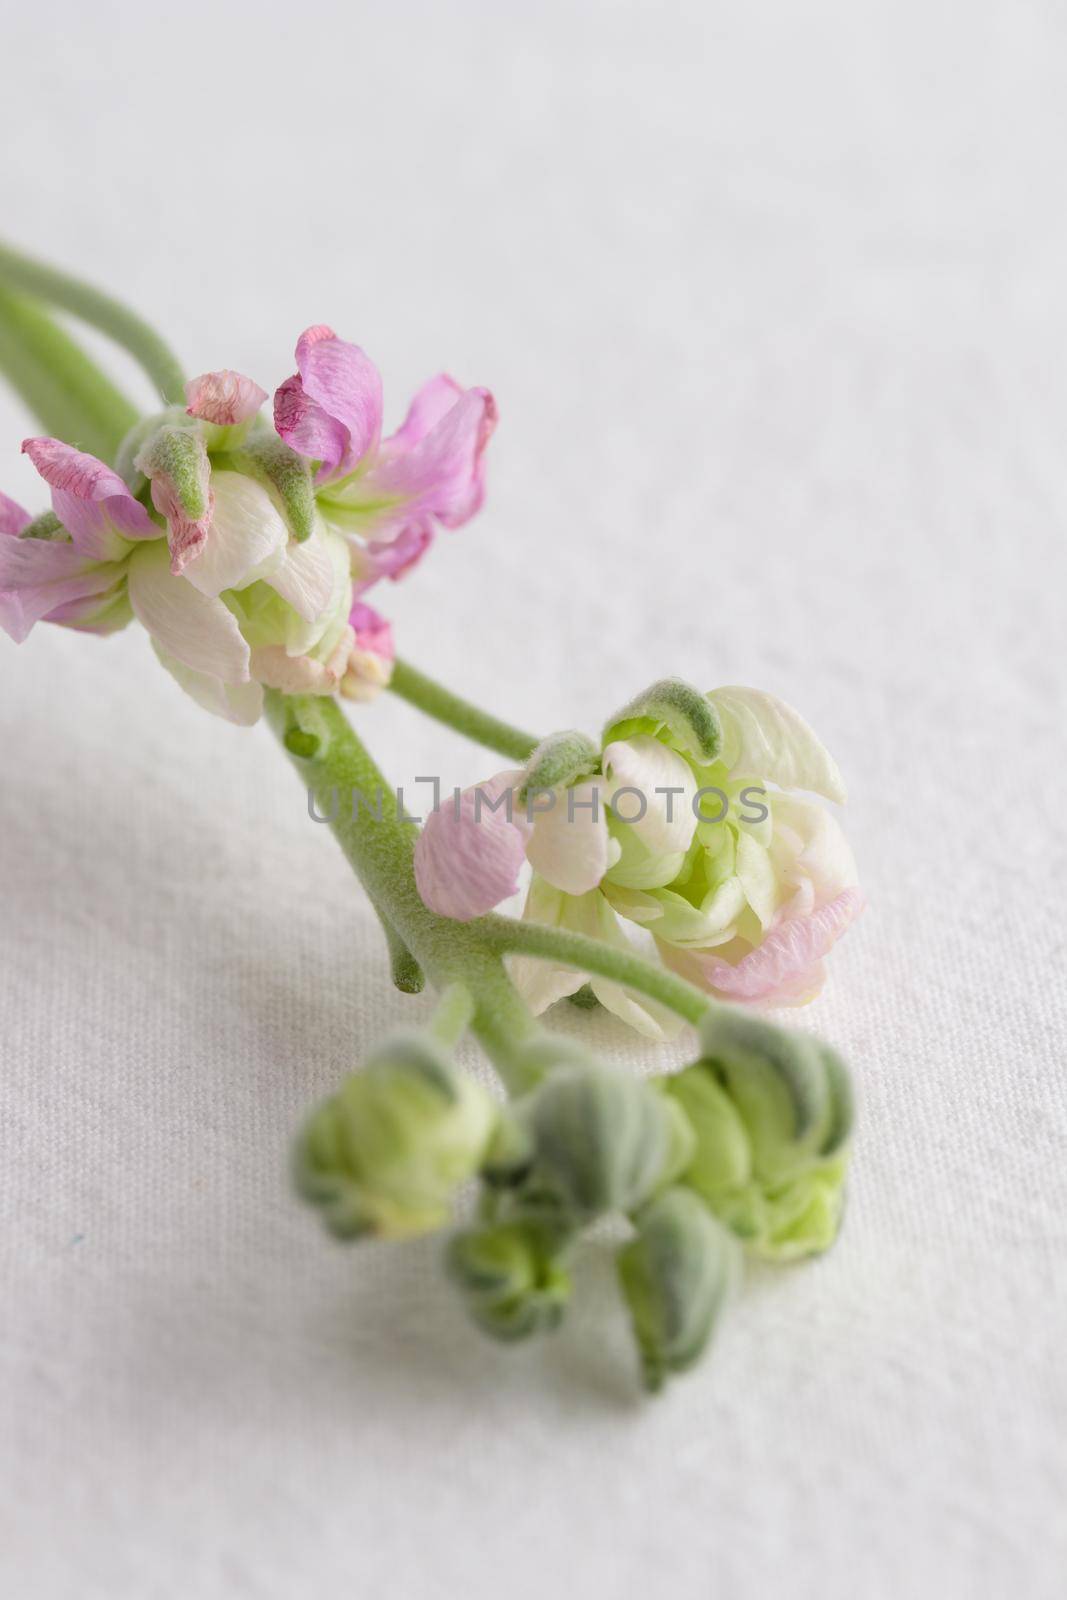 Floral pattern made of pinkflowers on white background macro